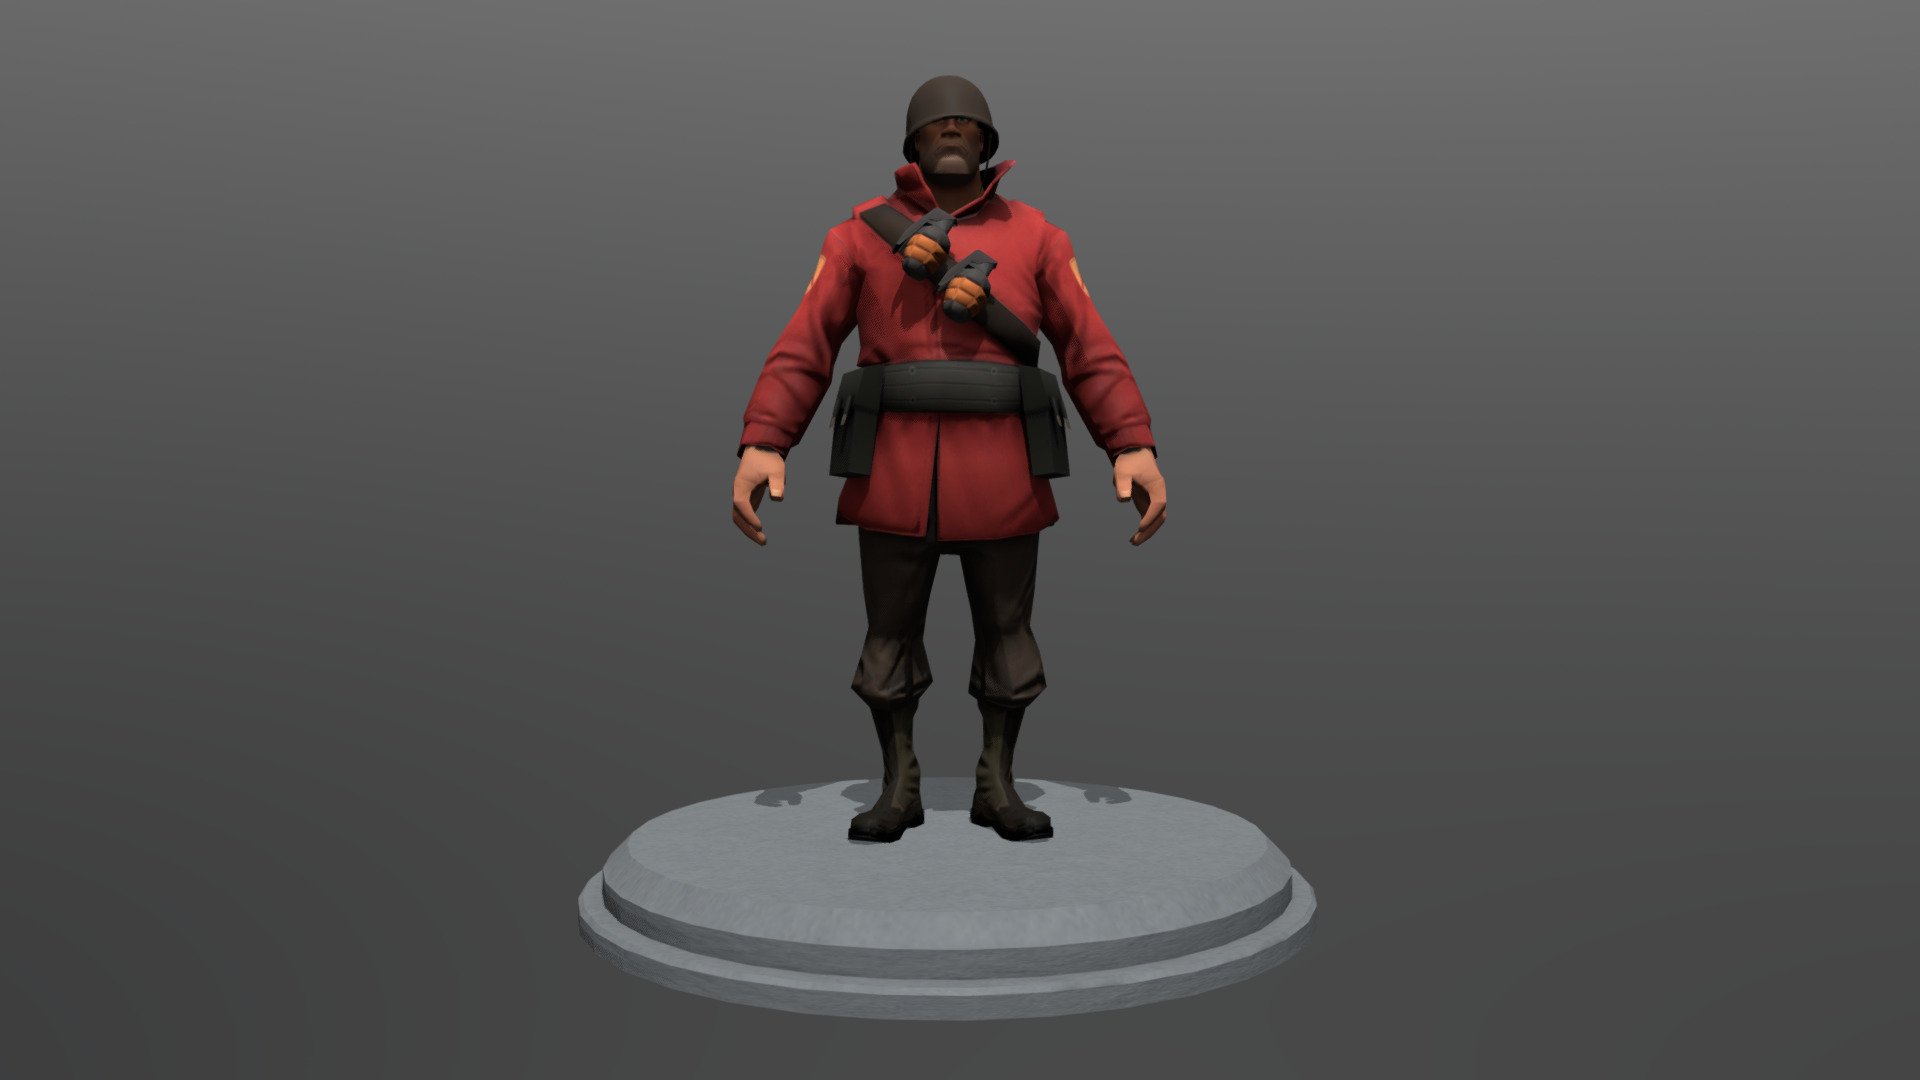 blender tf2 models, Freebie: Character Of From Team Fortress 2 ...